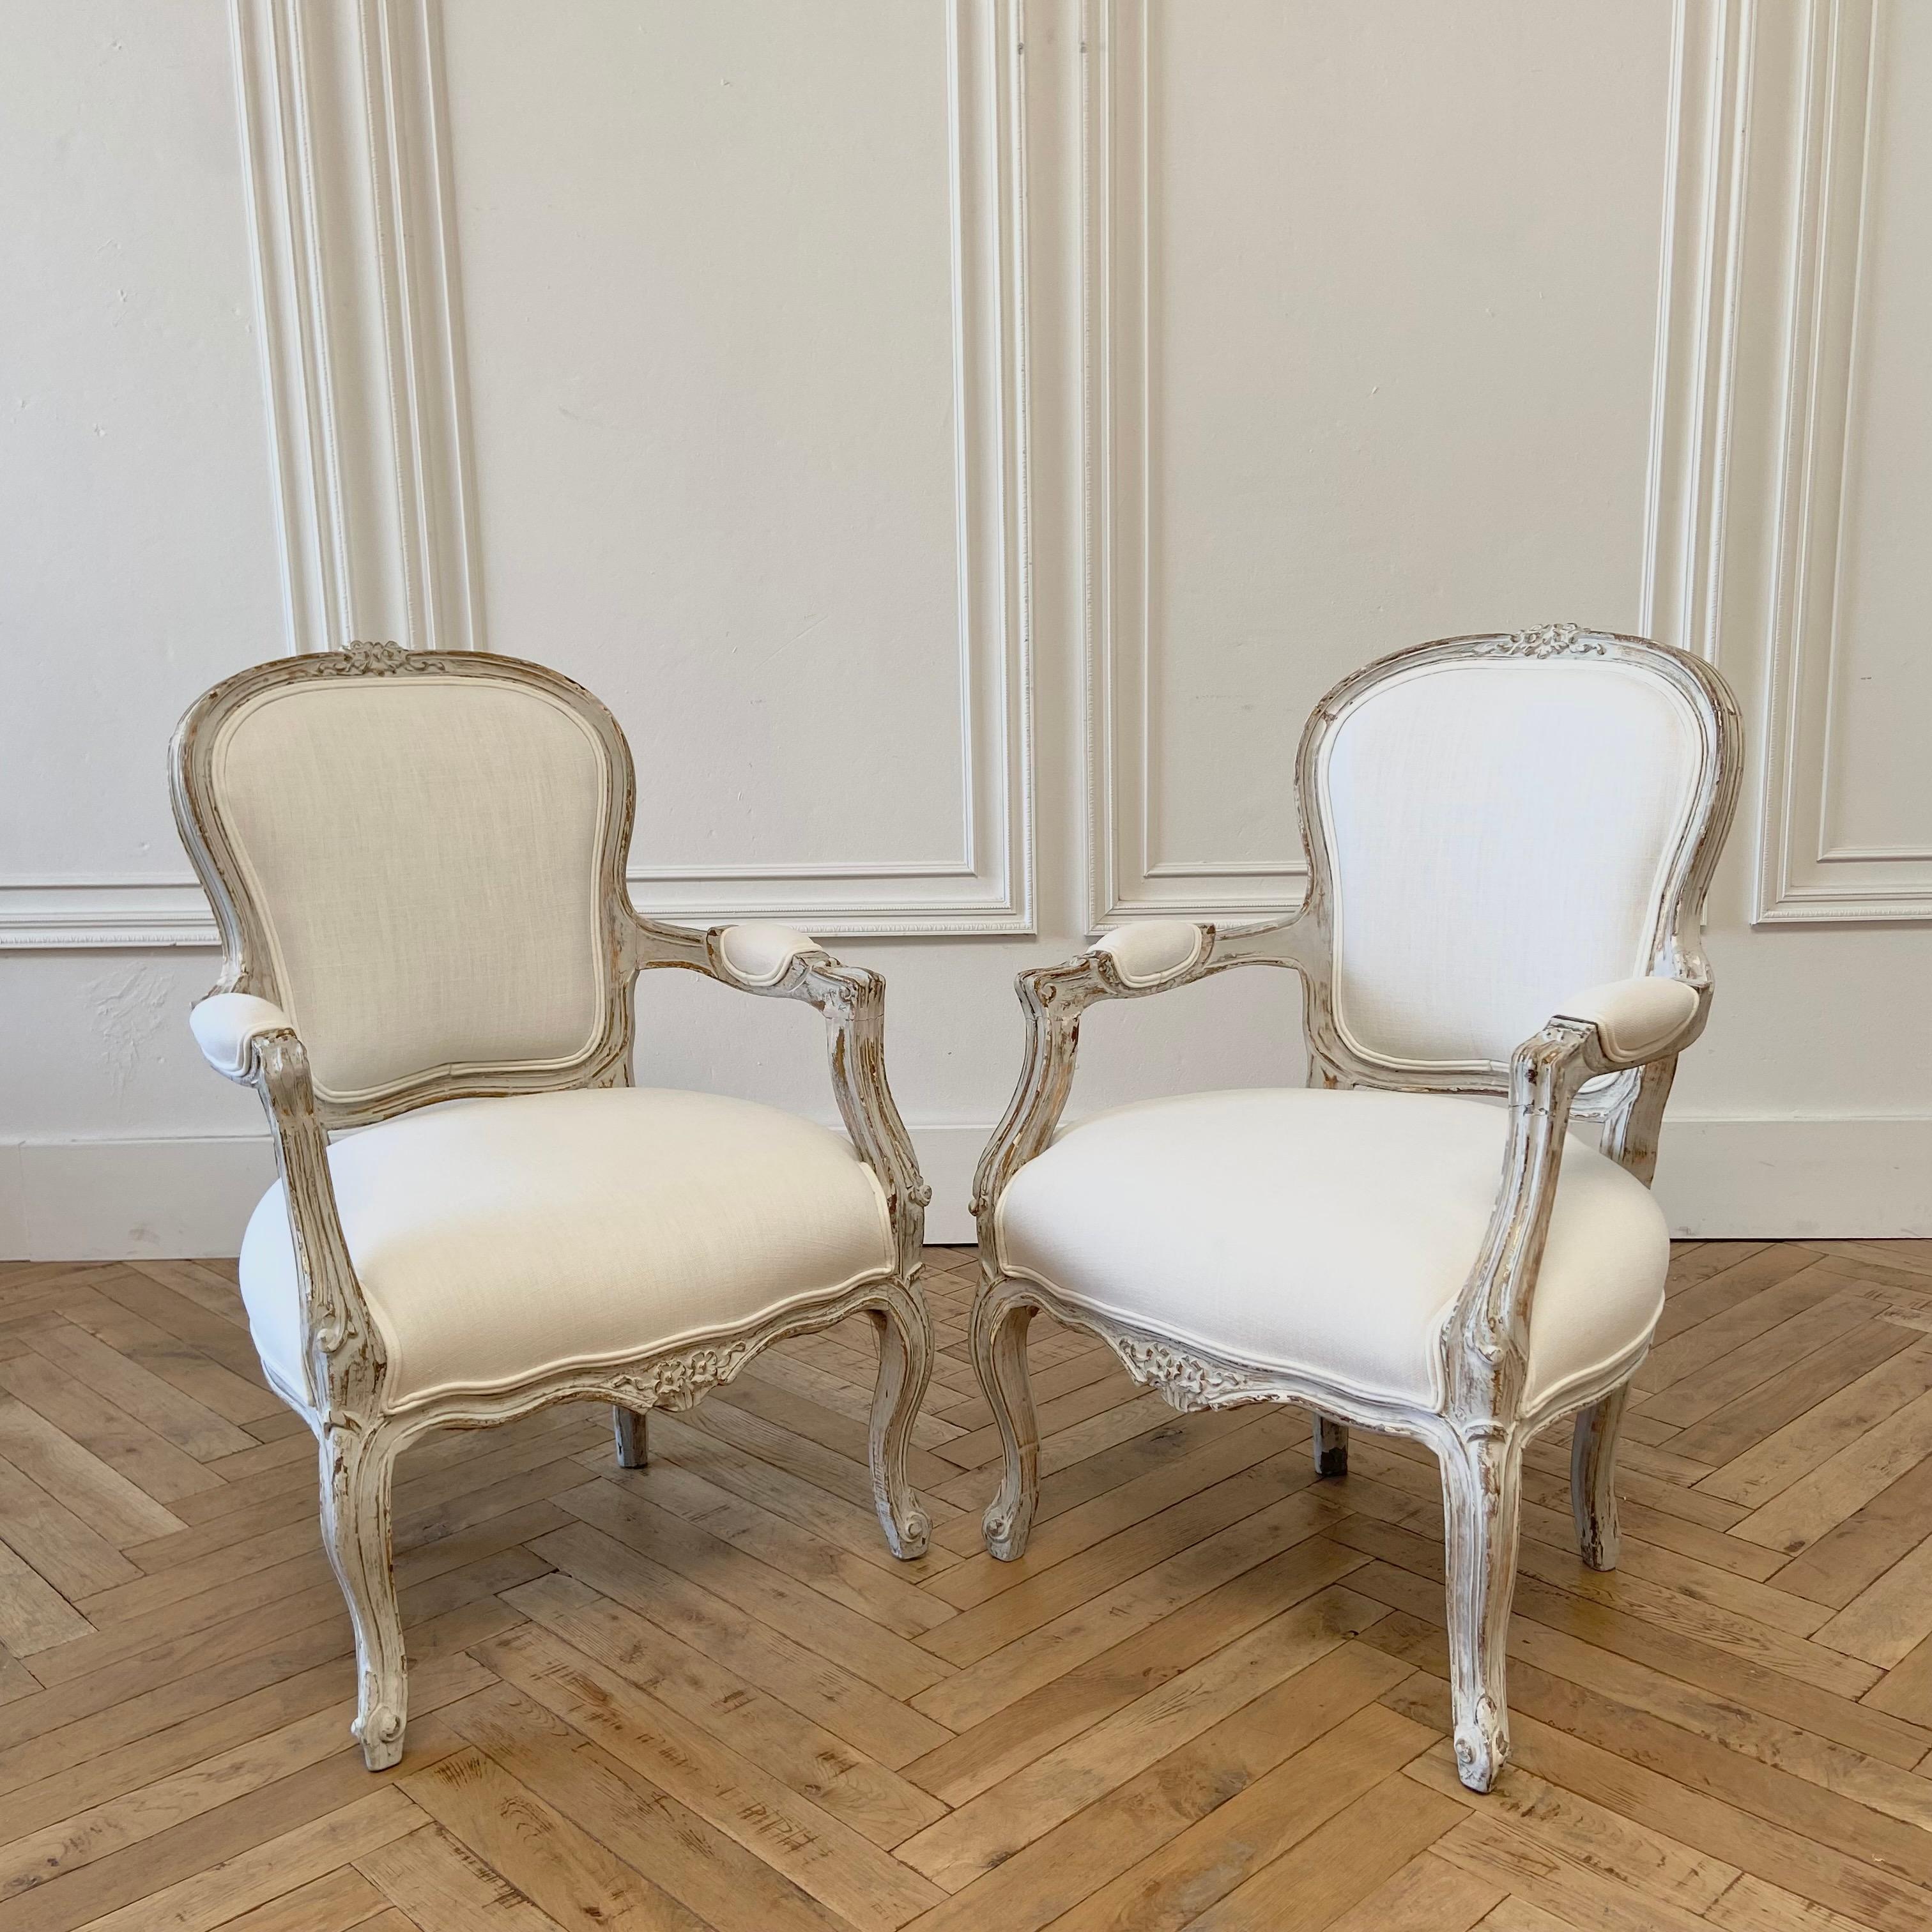 Pair of chairs
Vintage style painted and upholstered Louis XV style open arm chairs.
Painted in a Oyster Gray - White with subtle distressed edges, and finished with an antique Glazed patina.
We have reupholstered these in a heavy weight Libeco